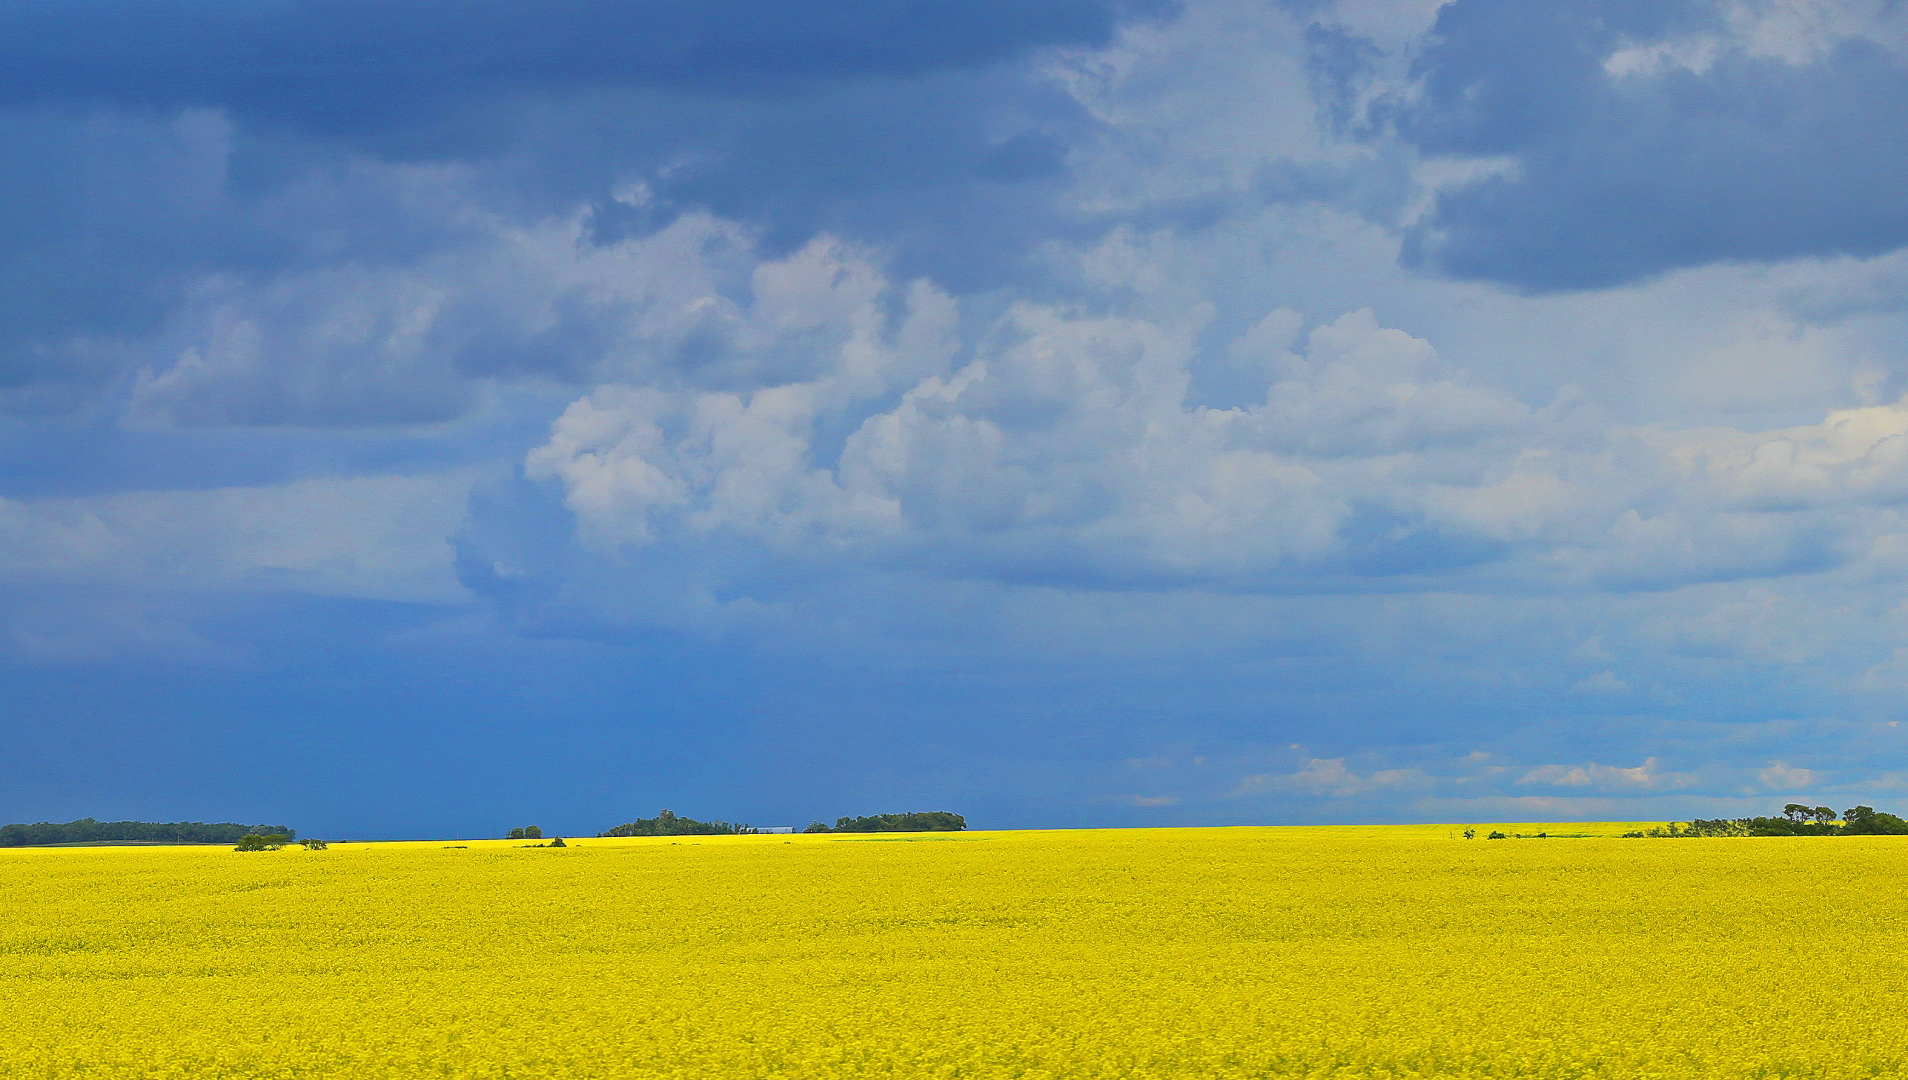 A yellow canola field spans the bottom half of the photo, while the top half is filled with a dark blue cloudy sky. 